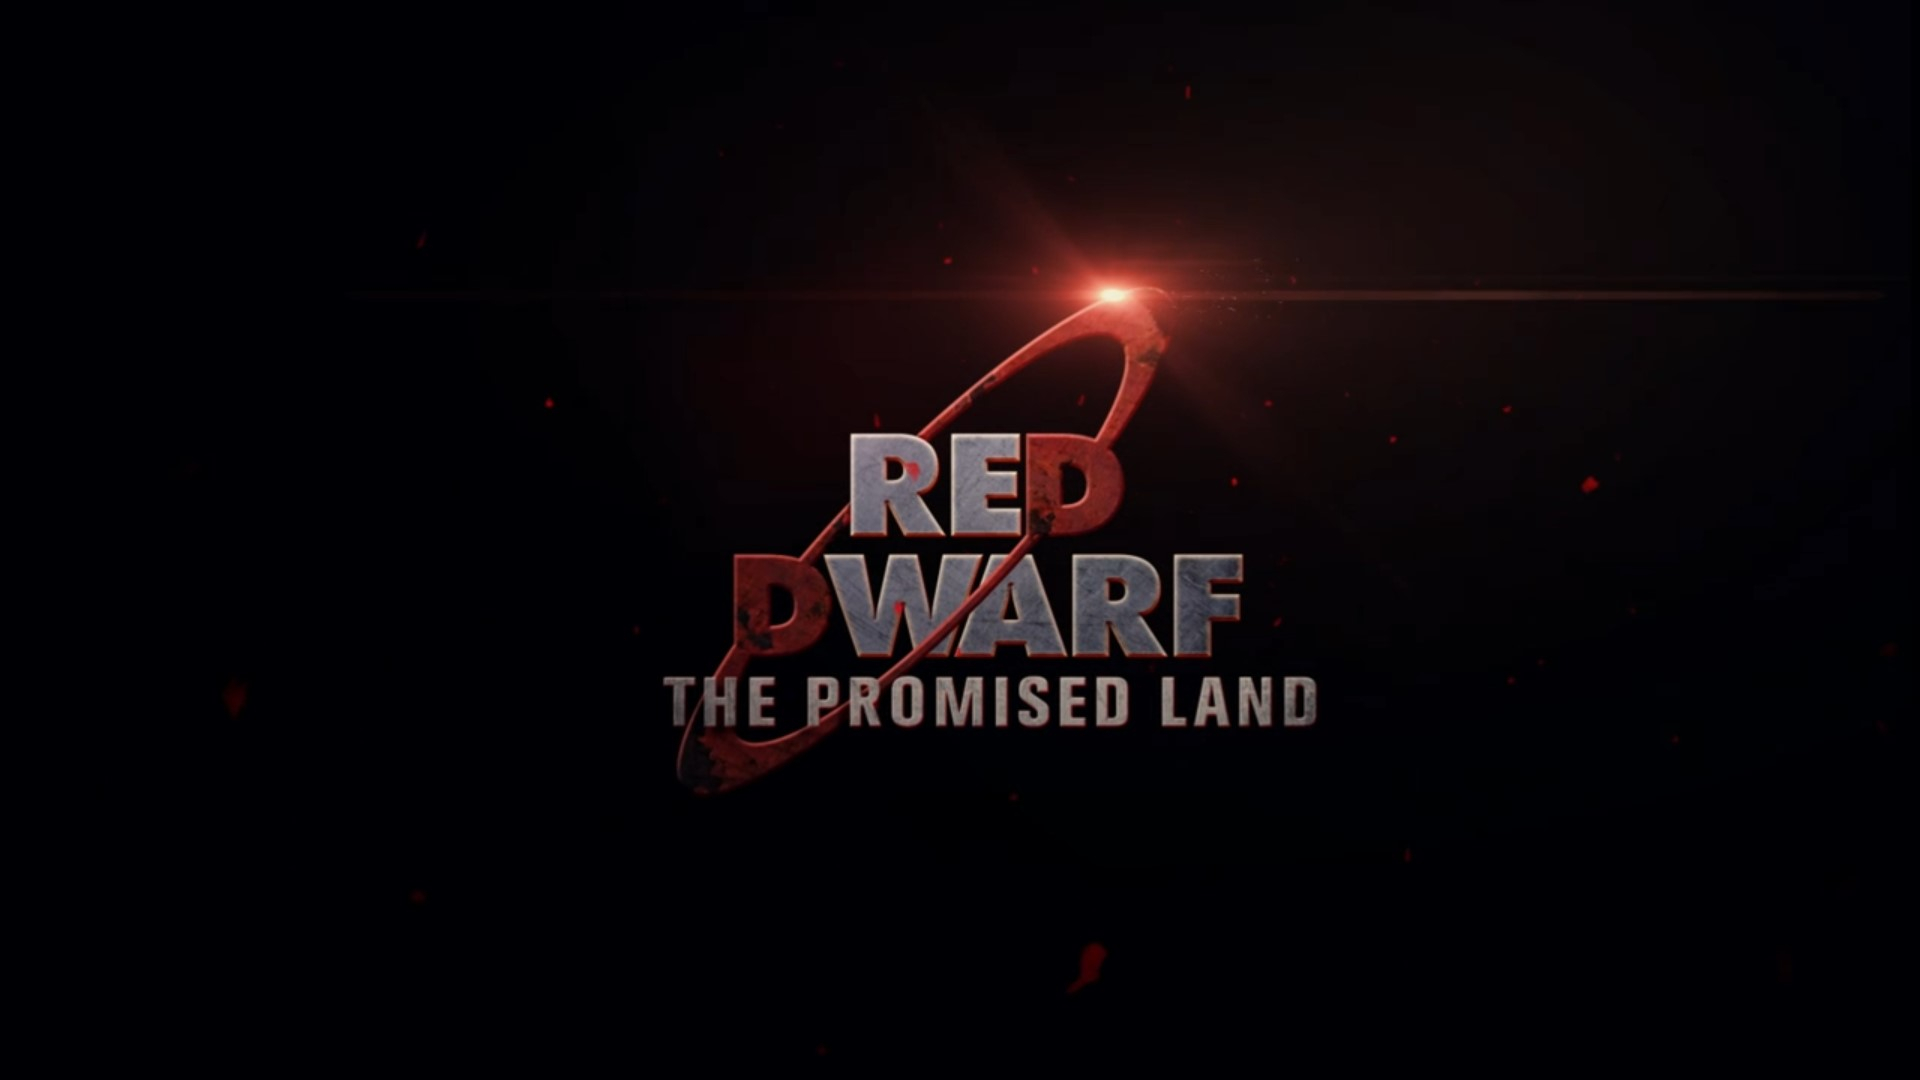 1920x1080 Movie Review &acirc;&#128;&#147; Red Dwarf: The Promised Land &acirc;&#128;&#147; The Review Nebula